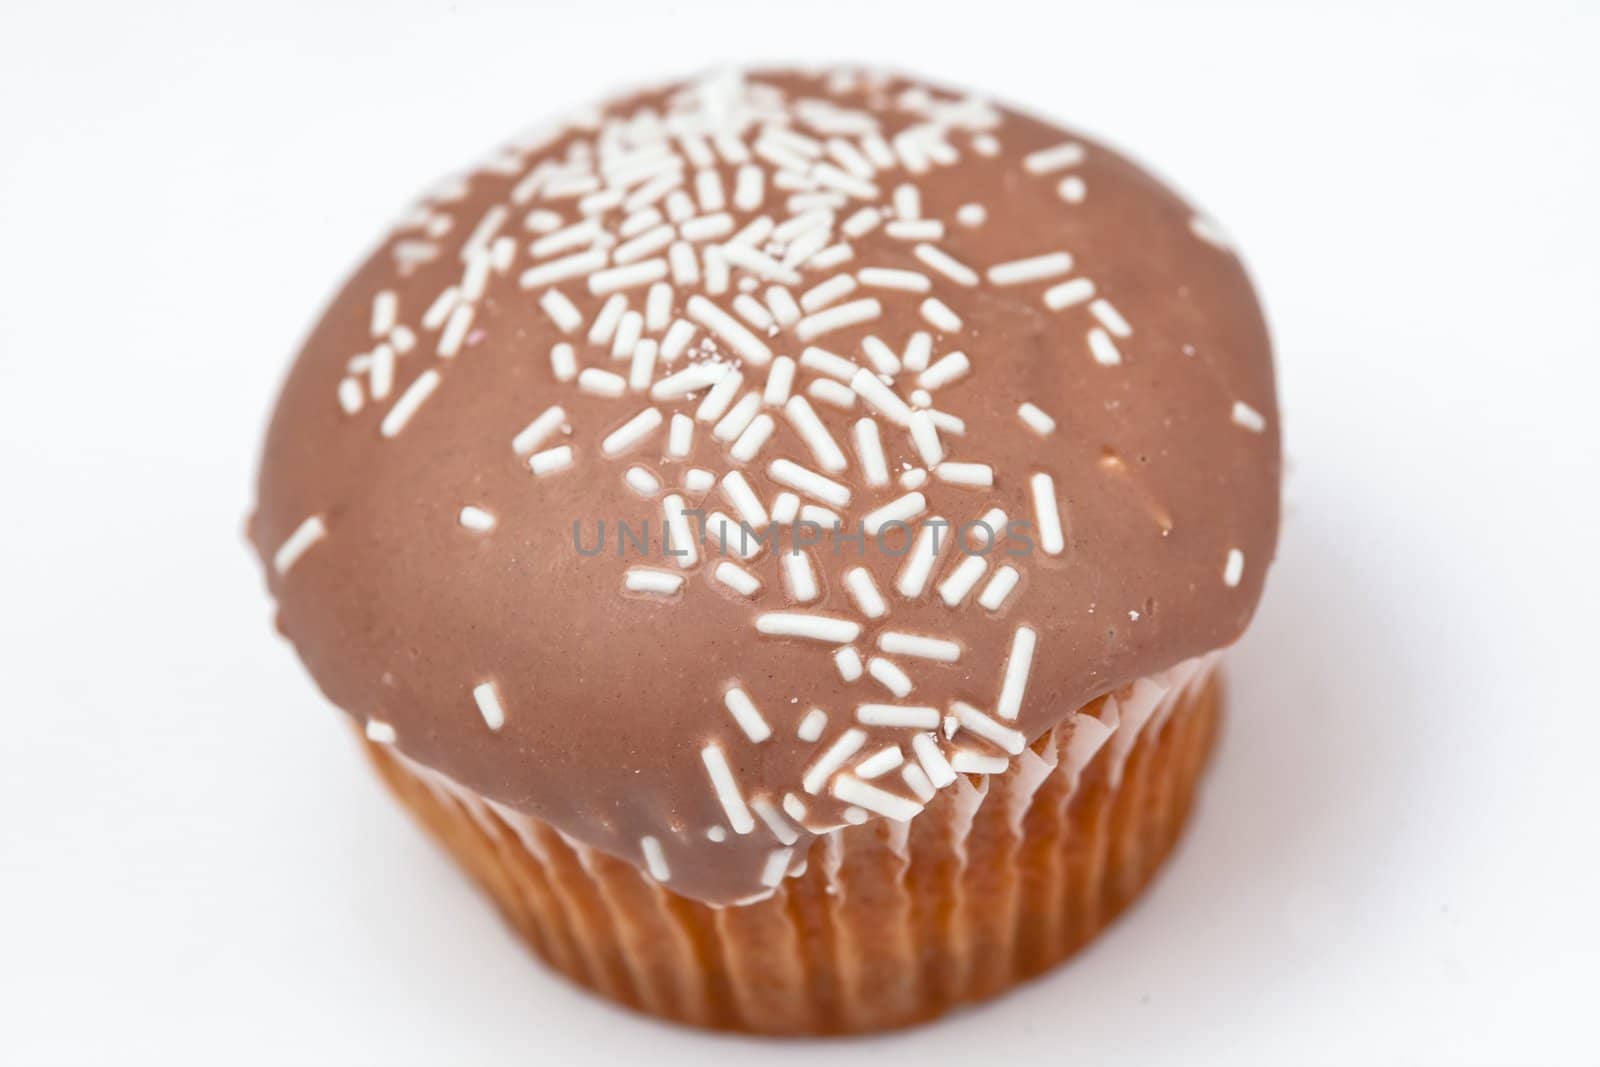 Brown cupcake against a white background